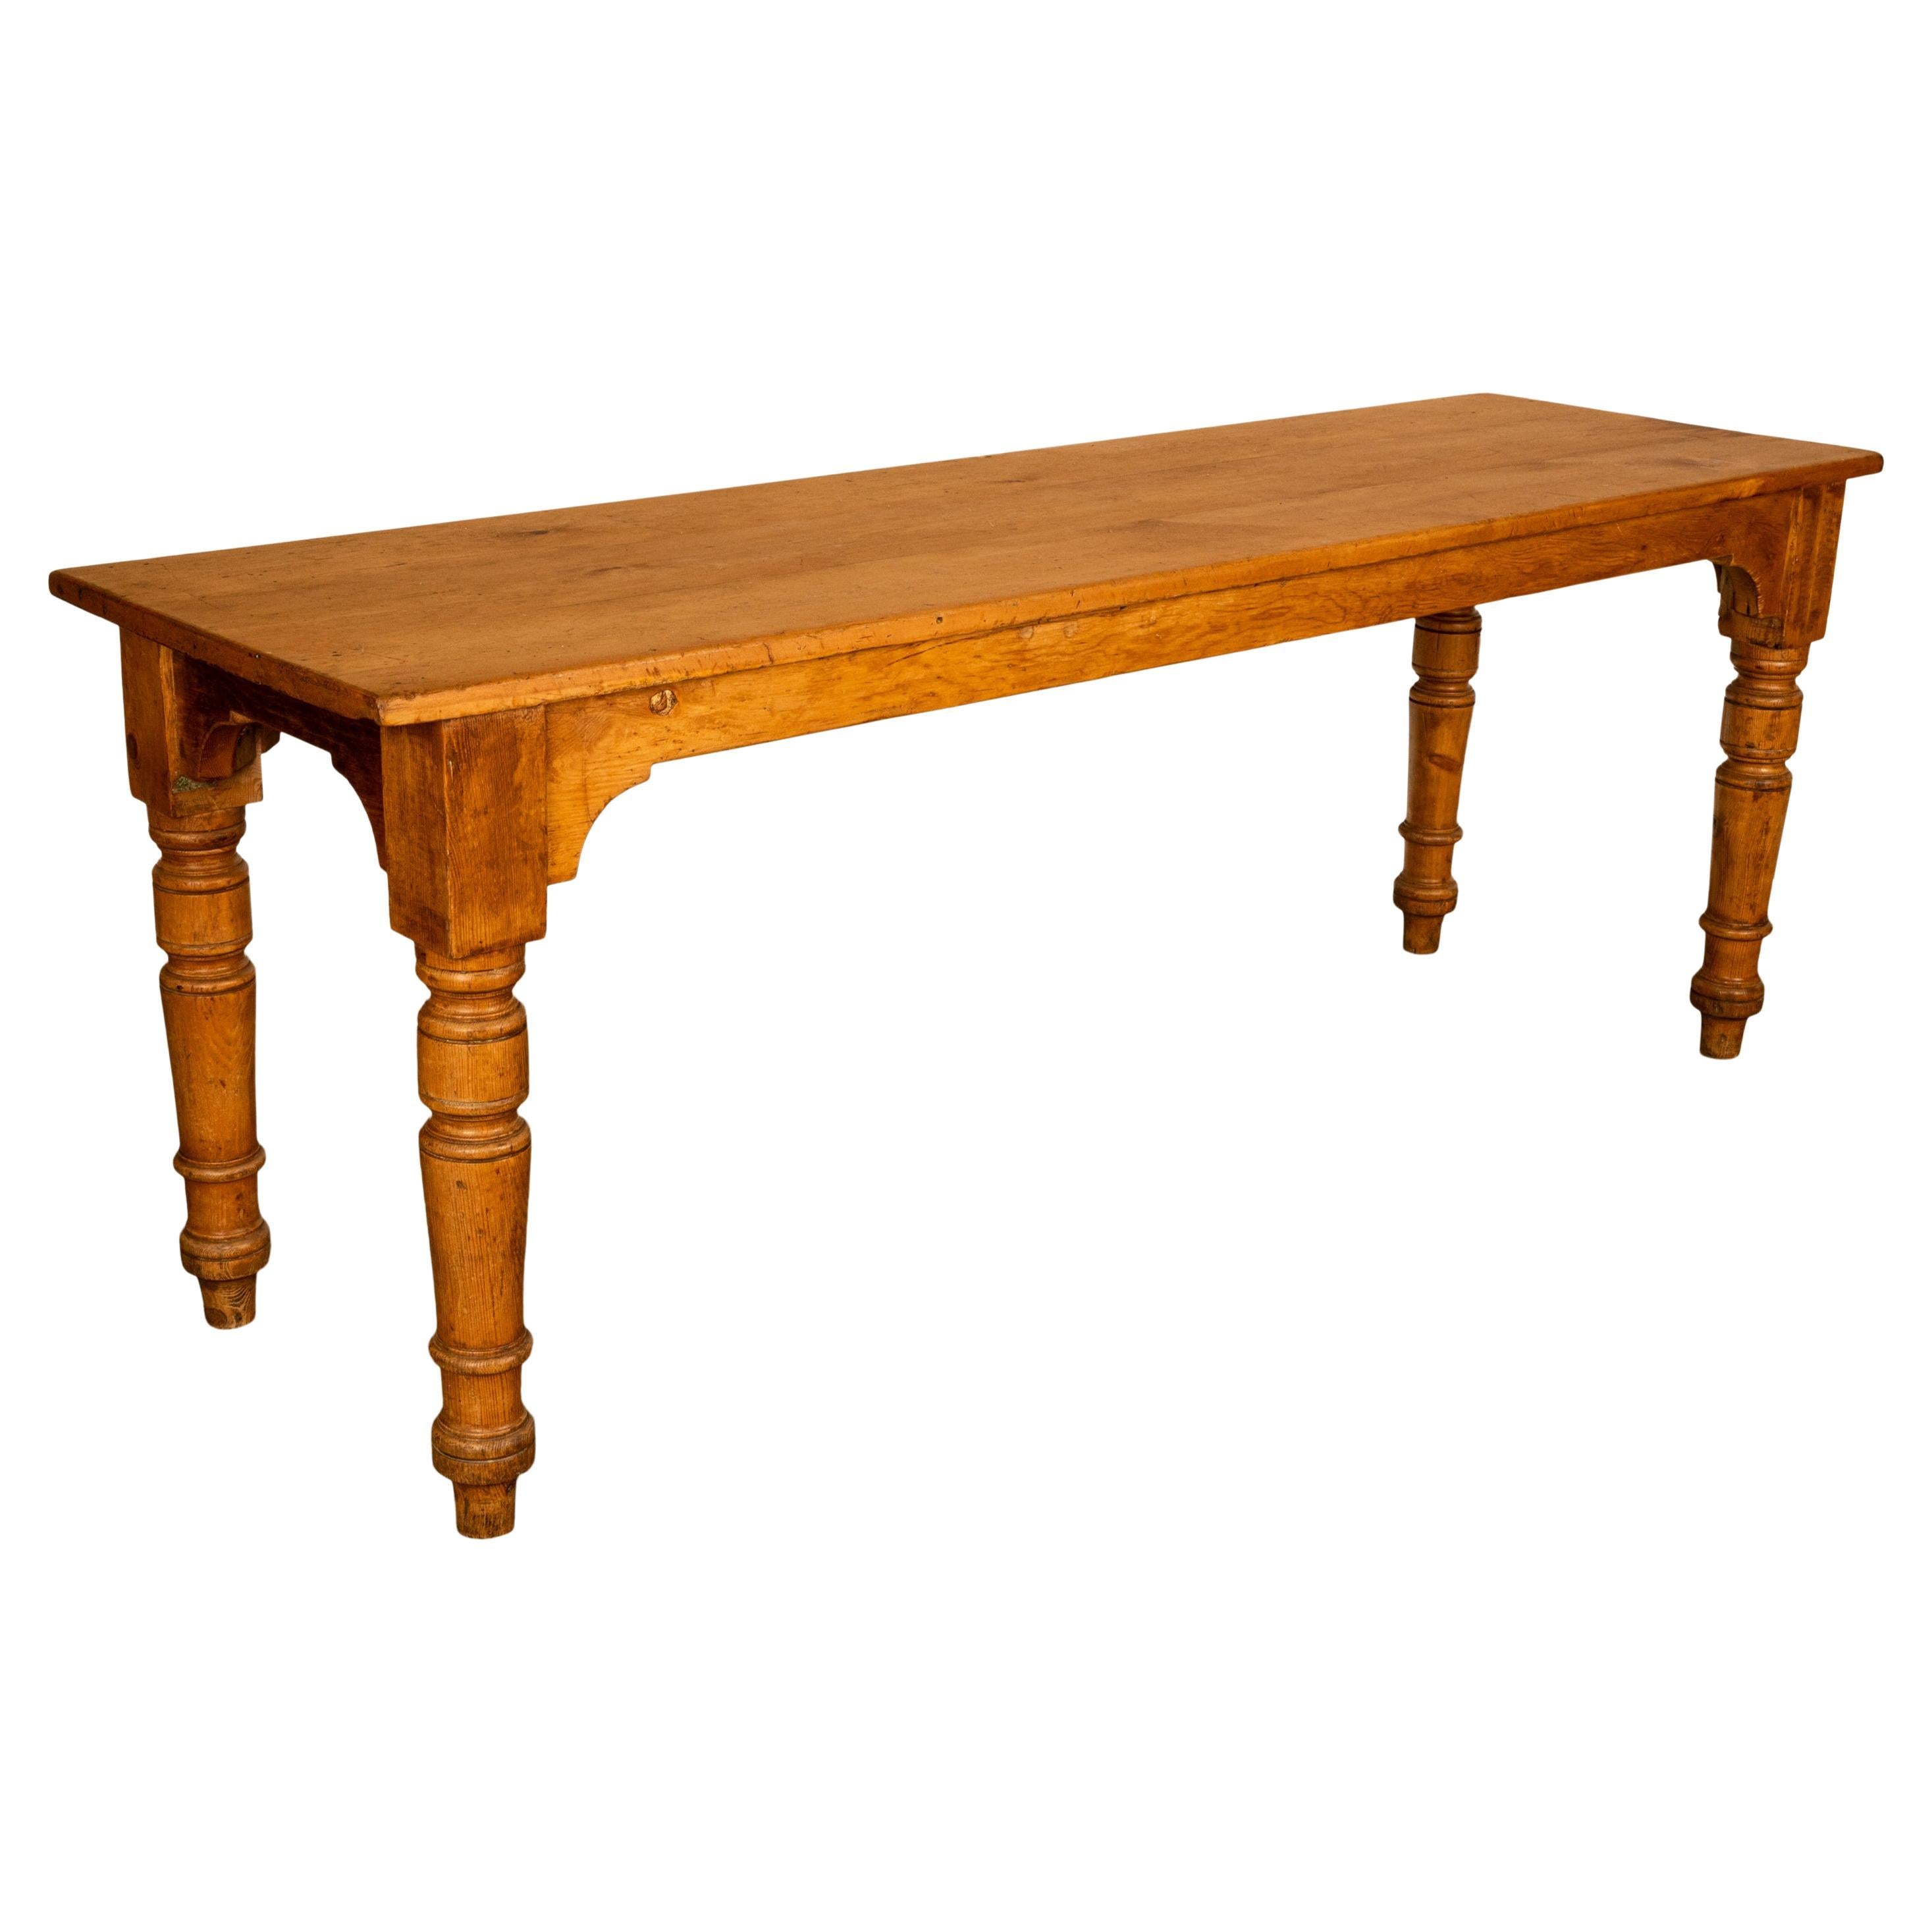 Turned Antique 19th Century English Pine Country Farmhouse 8 seat Dining Table 1860 For Sale